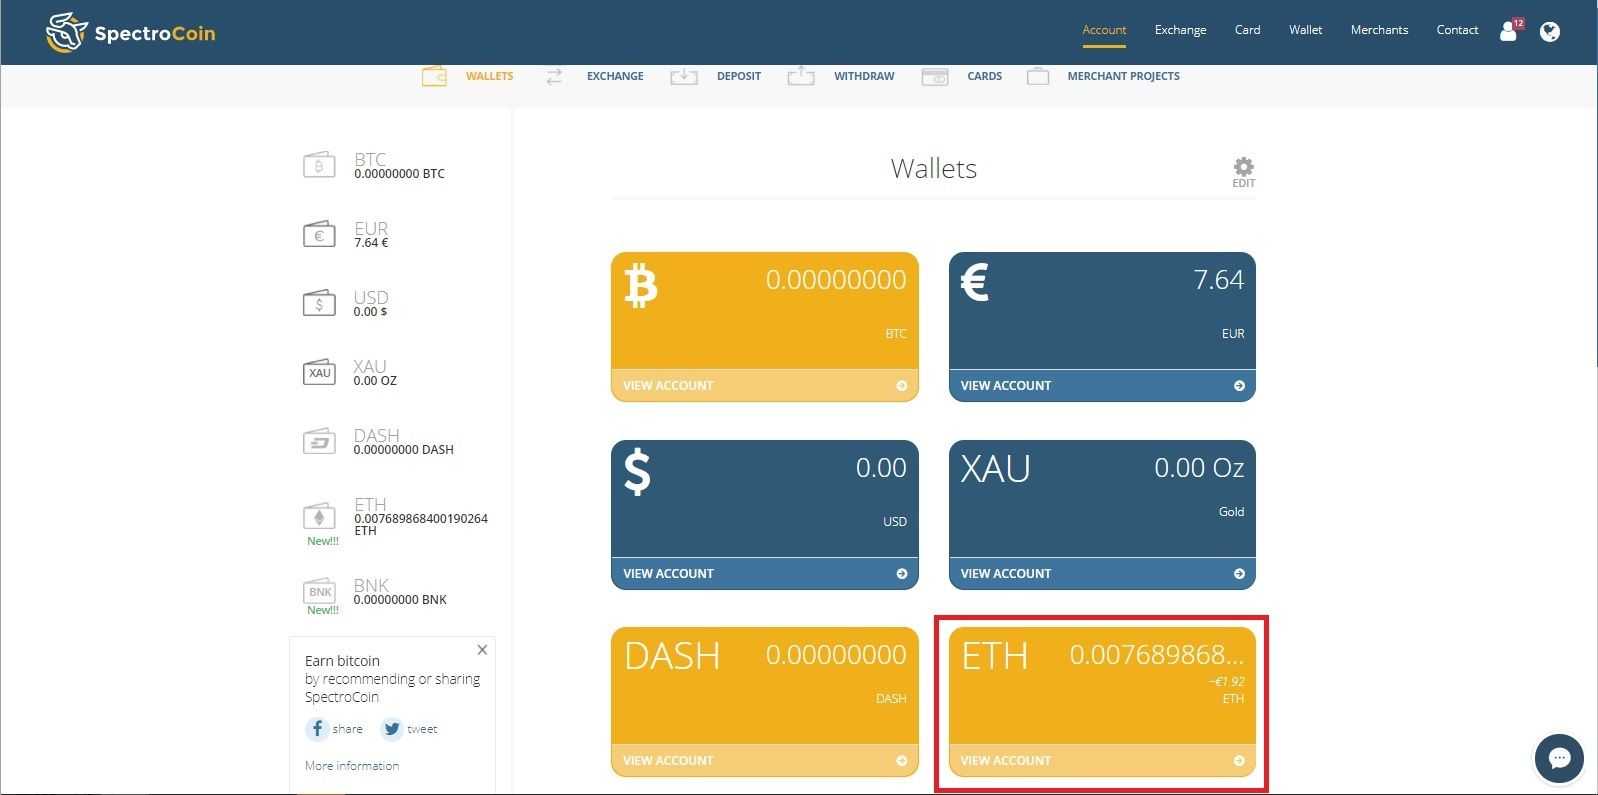 Check your SpectroCoin ETH wallet balance in the account section